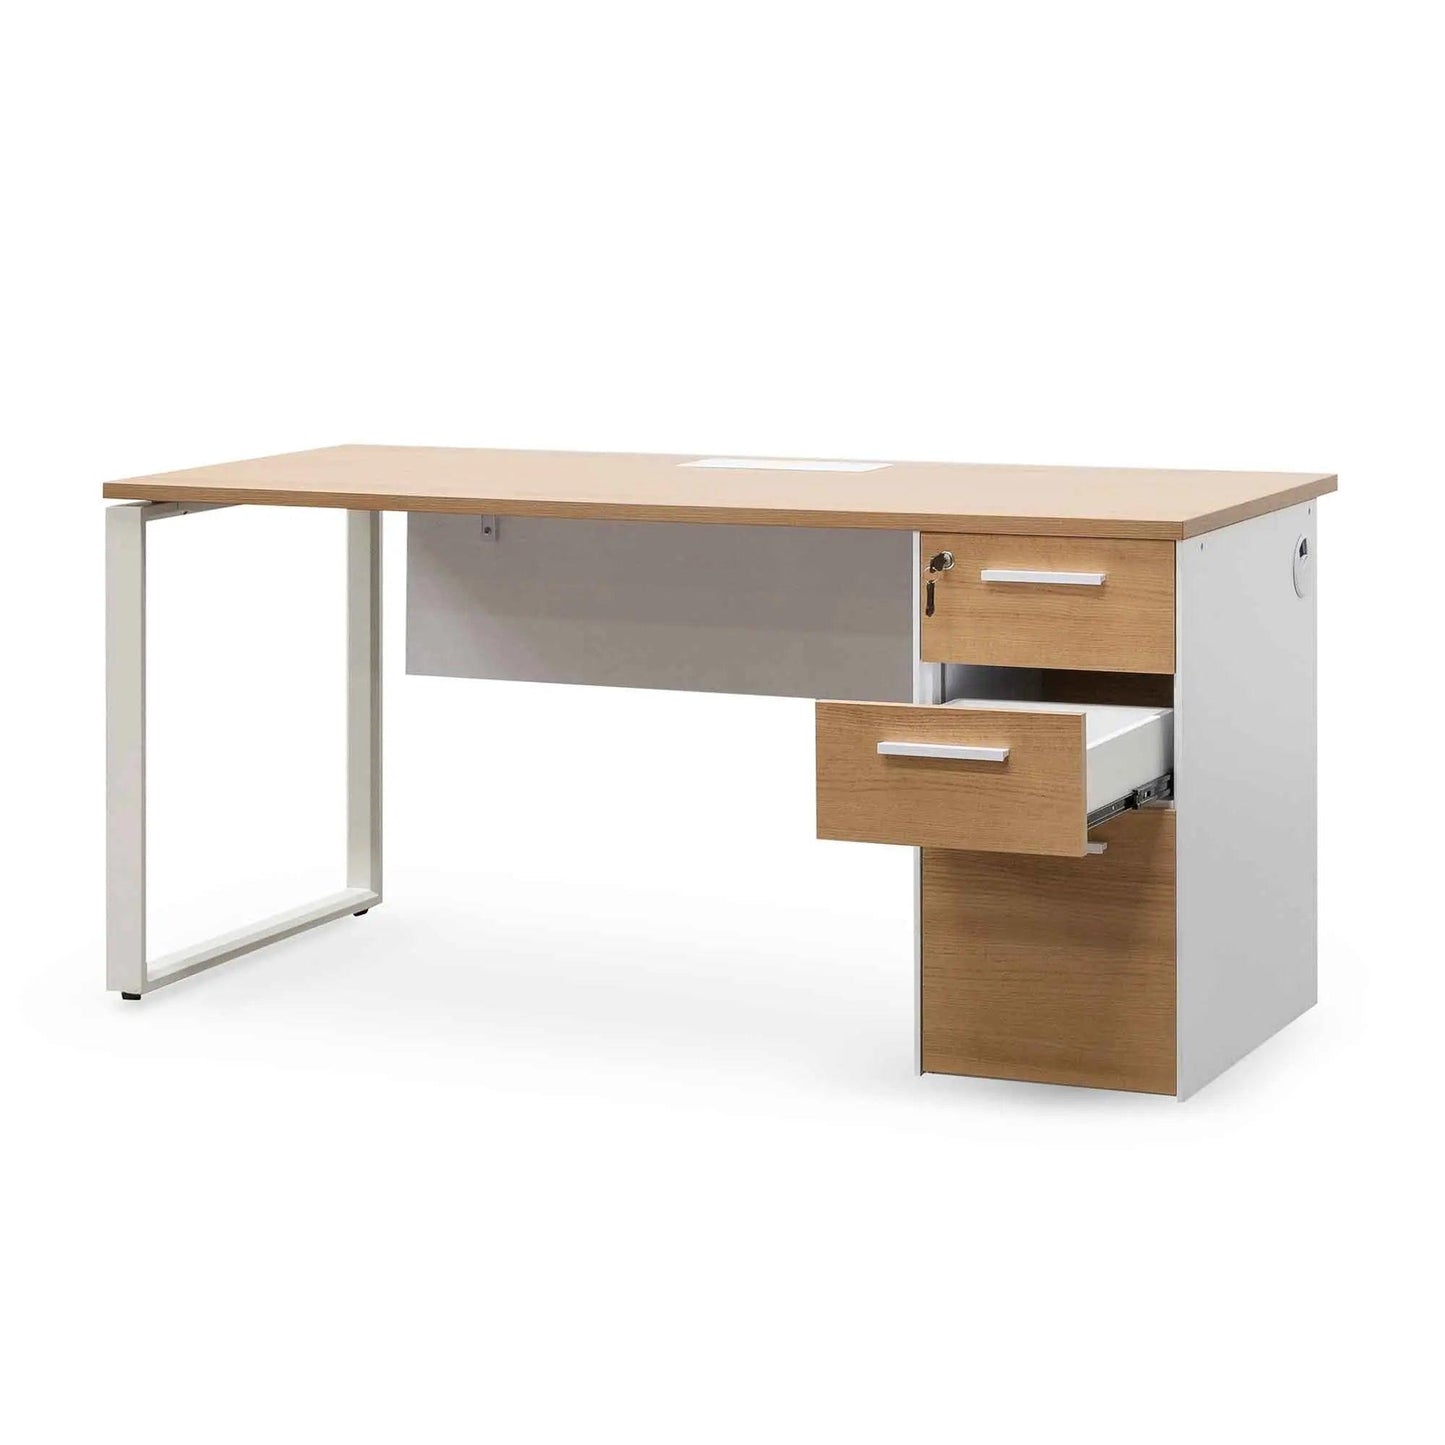 Calibre 1 Seater Office Desk - Natural and White OT6541-SN - Office DesksOT6541-SN 4